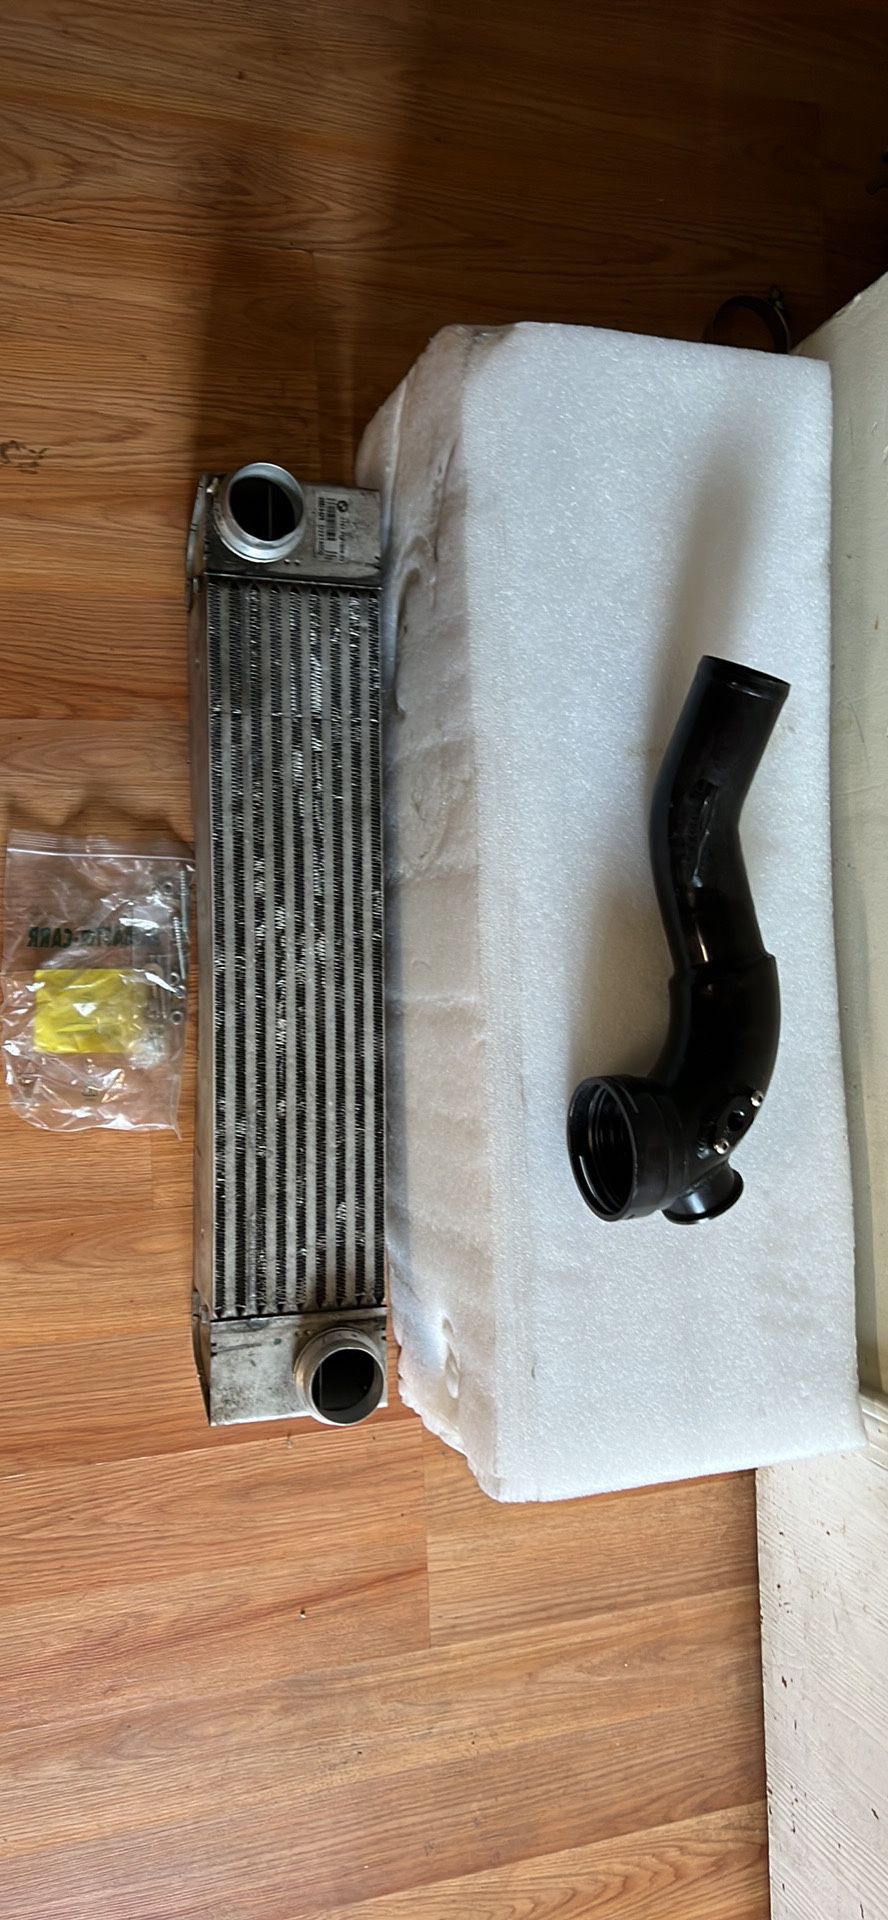 2008 Bmw 535 Intercooler And Aftermarket Down Pipe 